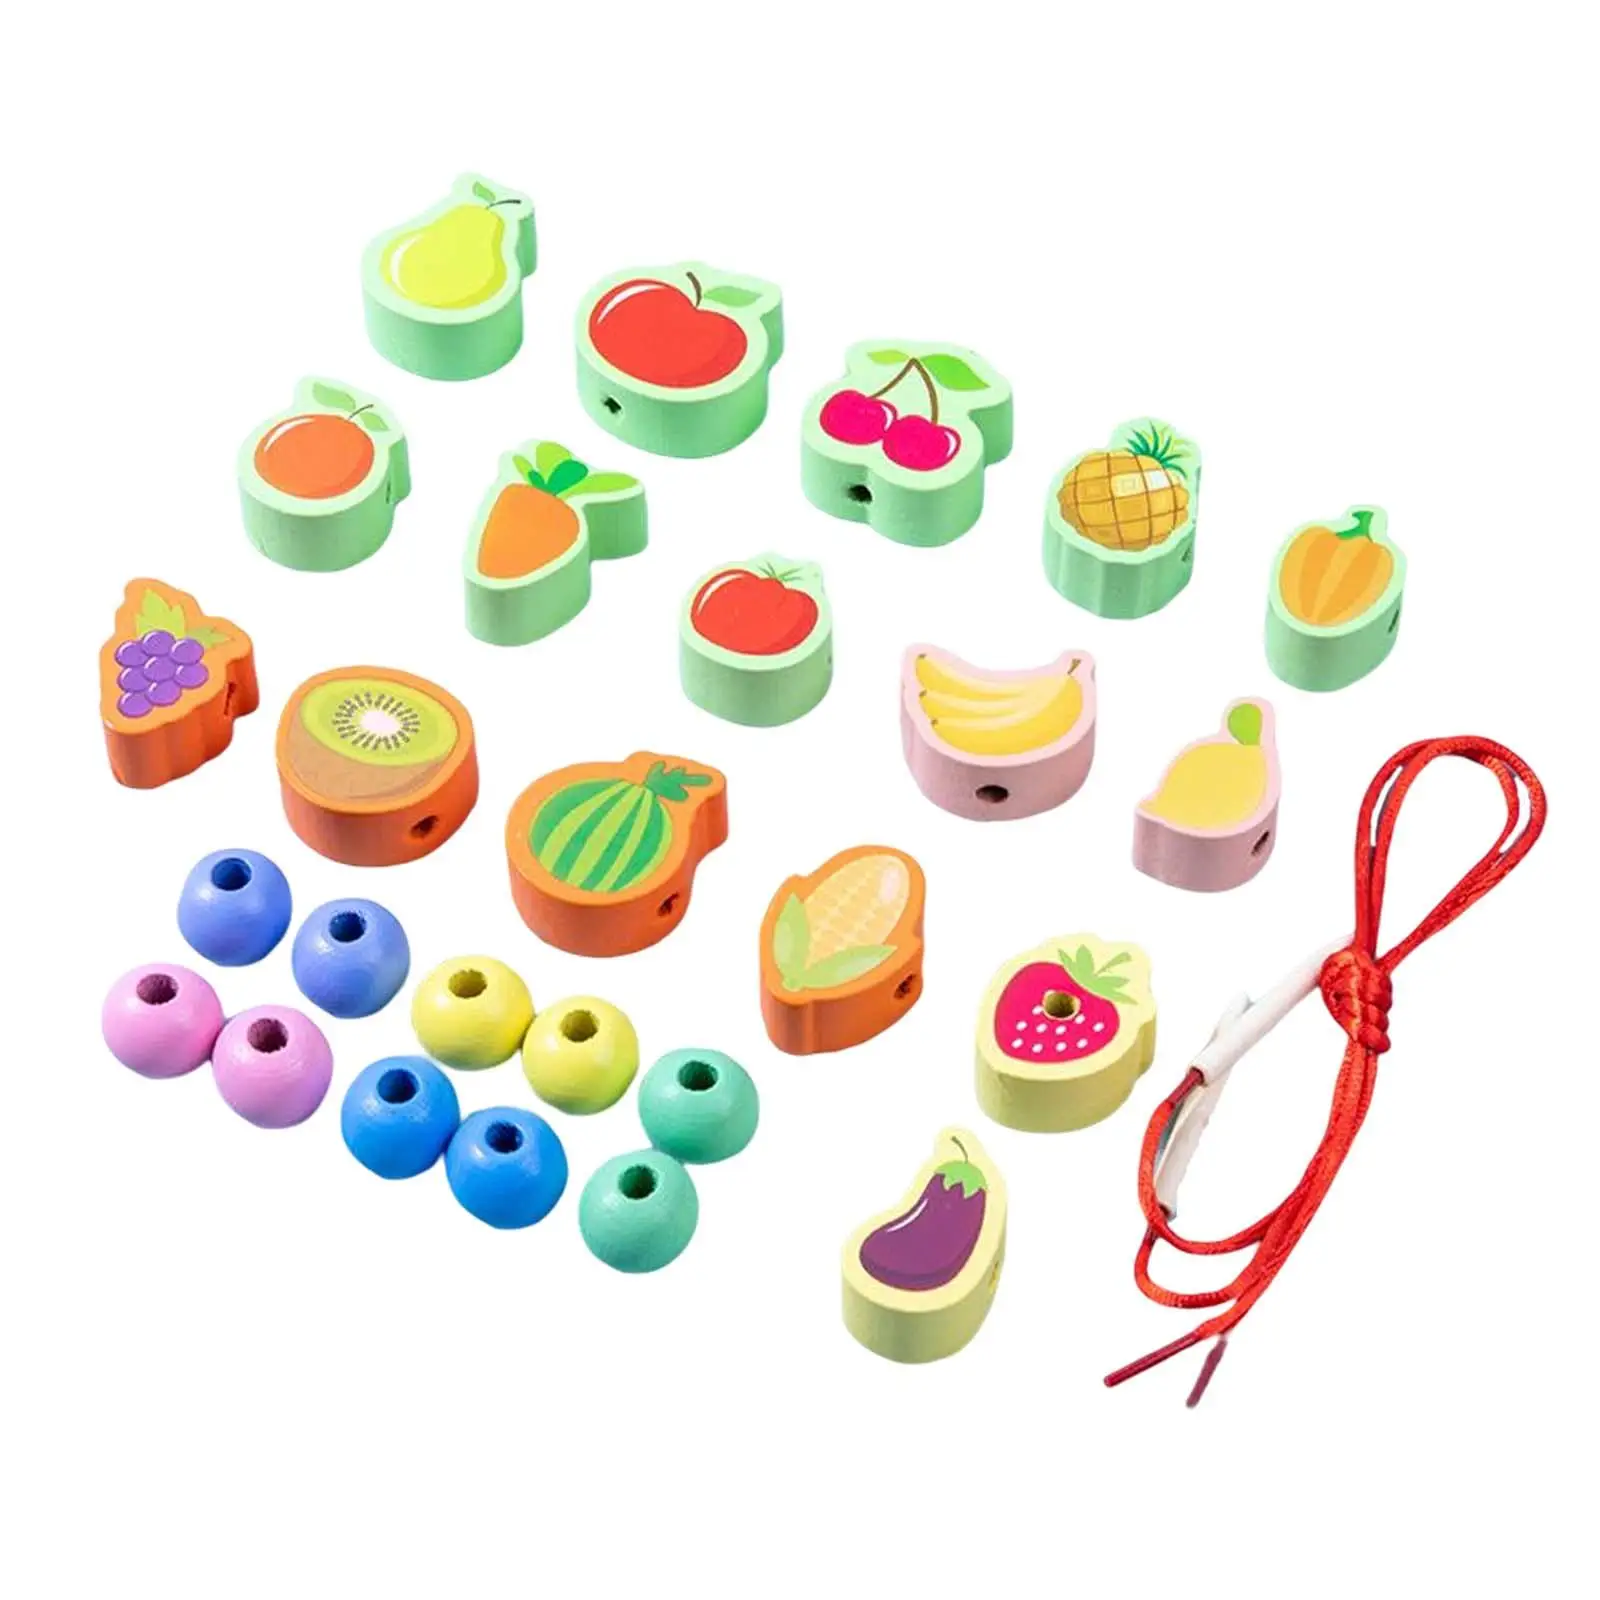 Threading Toys Wooden Crafts Preschool Lacing Beads Set for Birthday Gifts